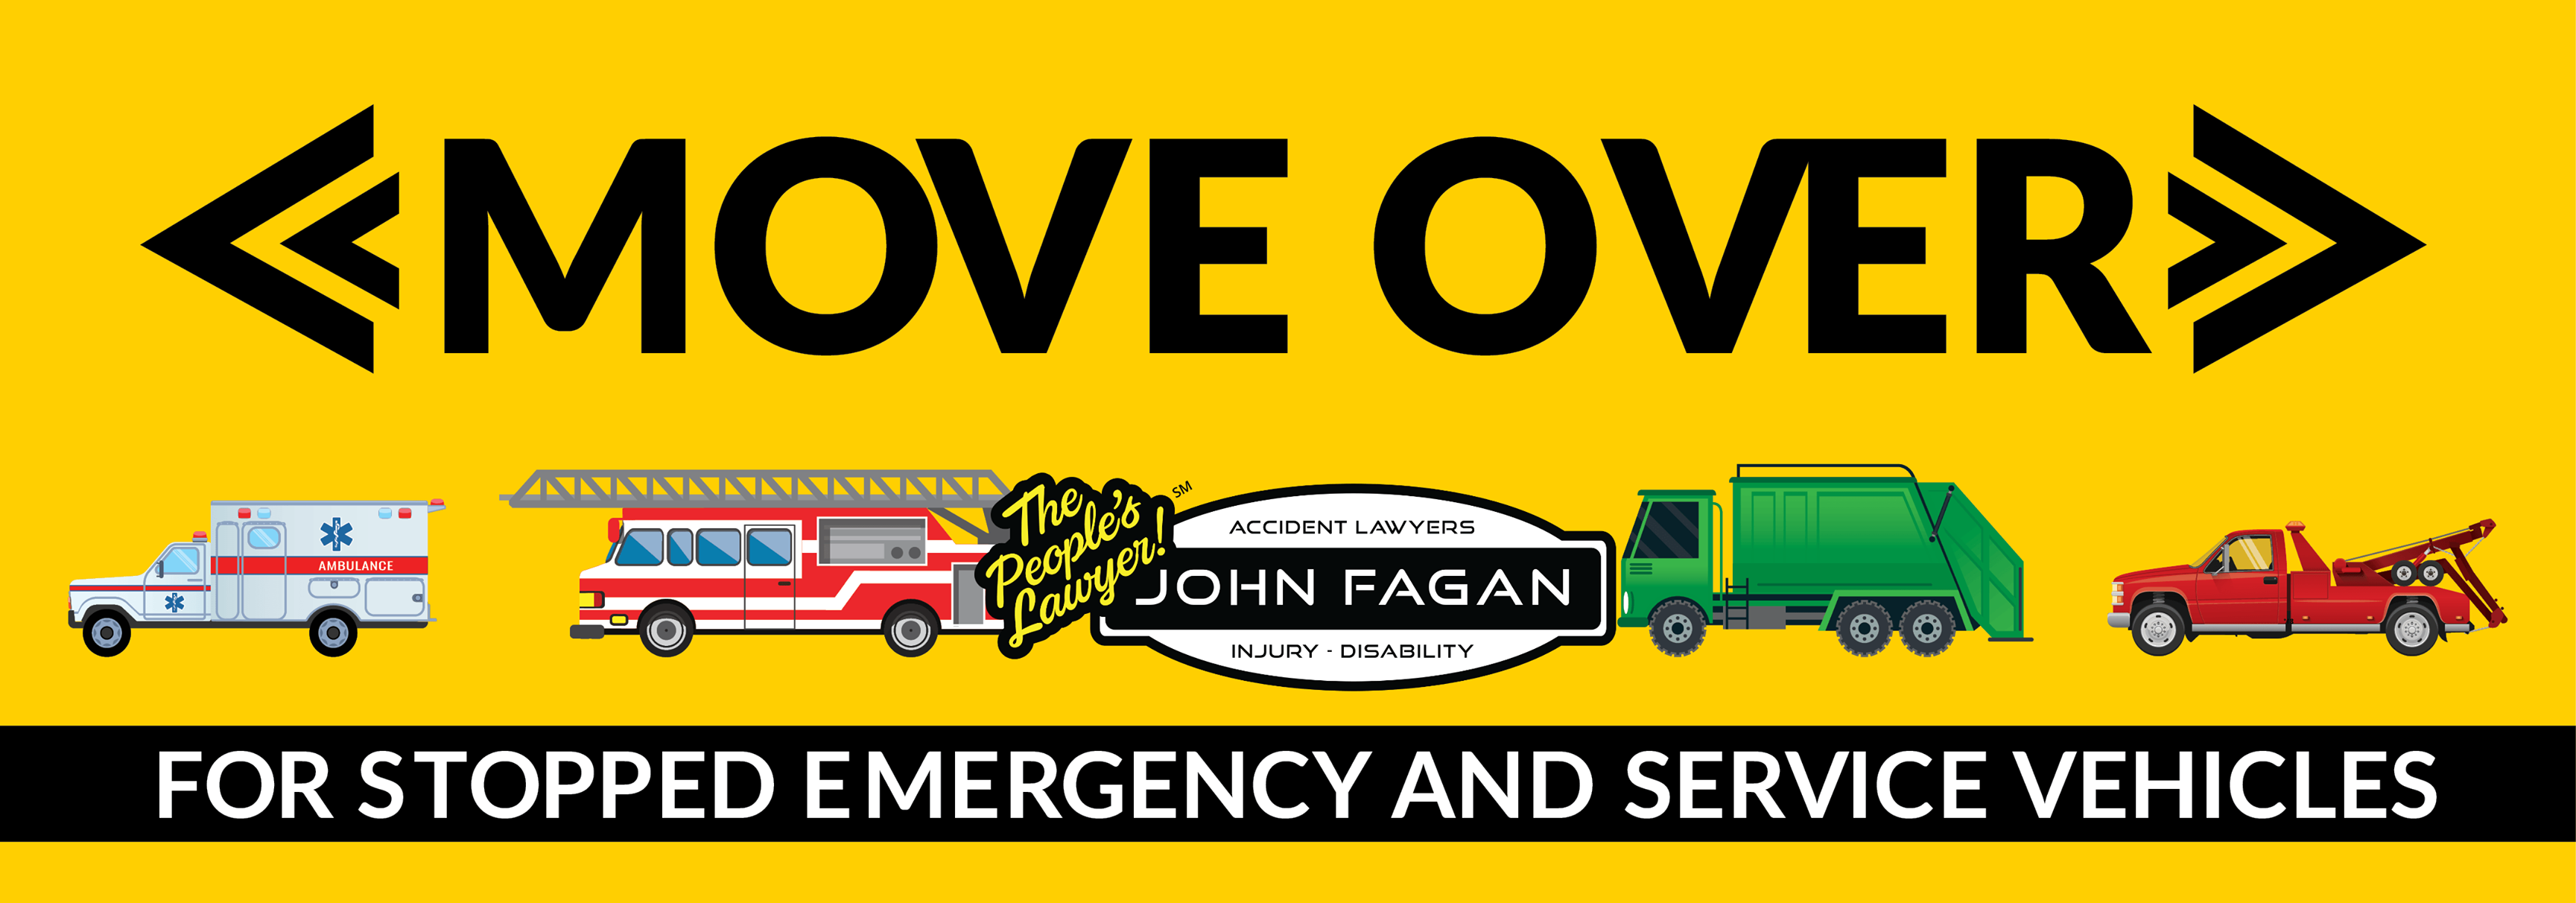 Move Over, Florida! – Florida Highway Safety and Motor Vehicles